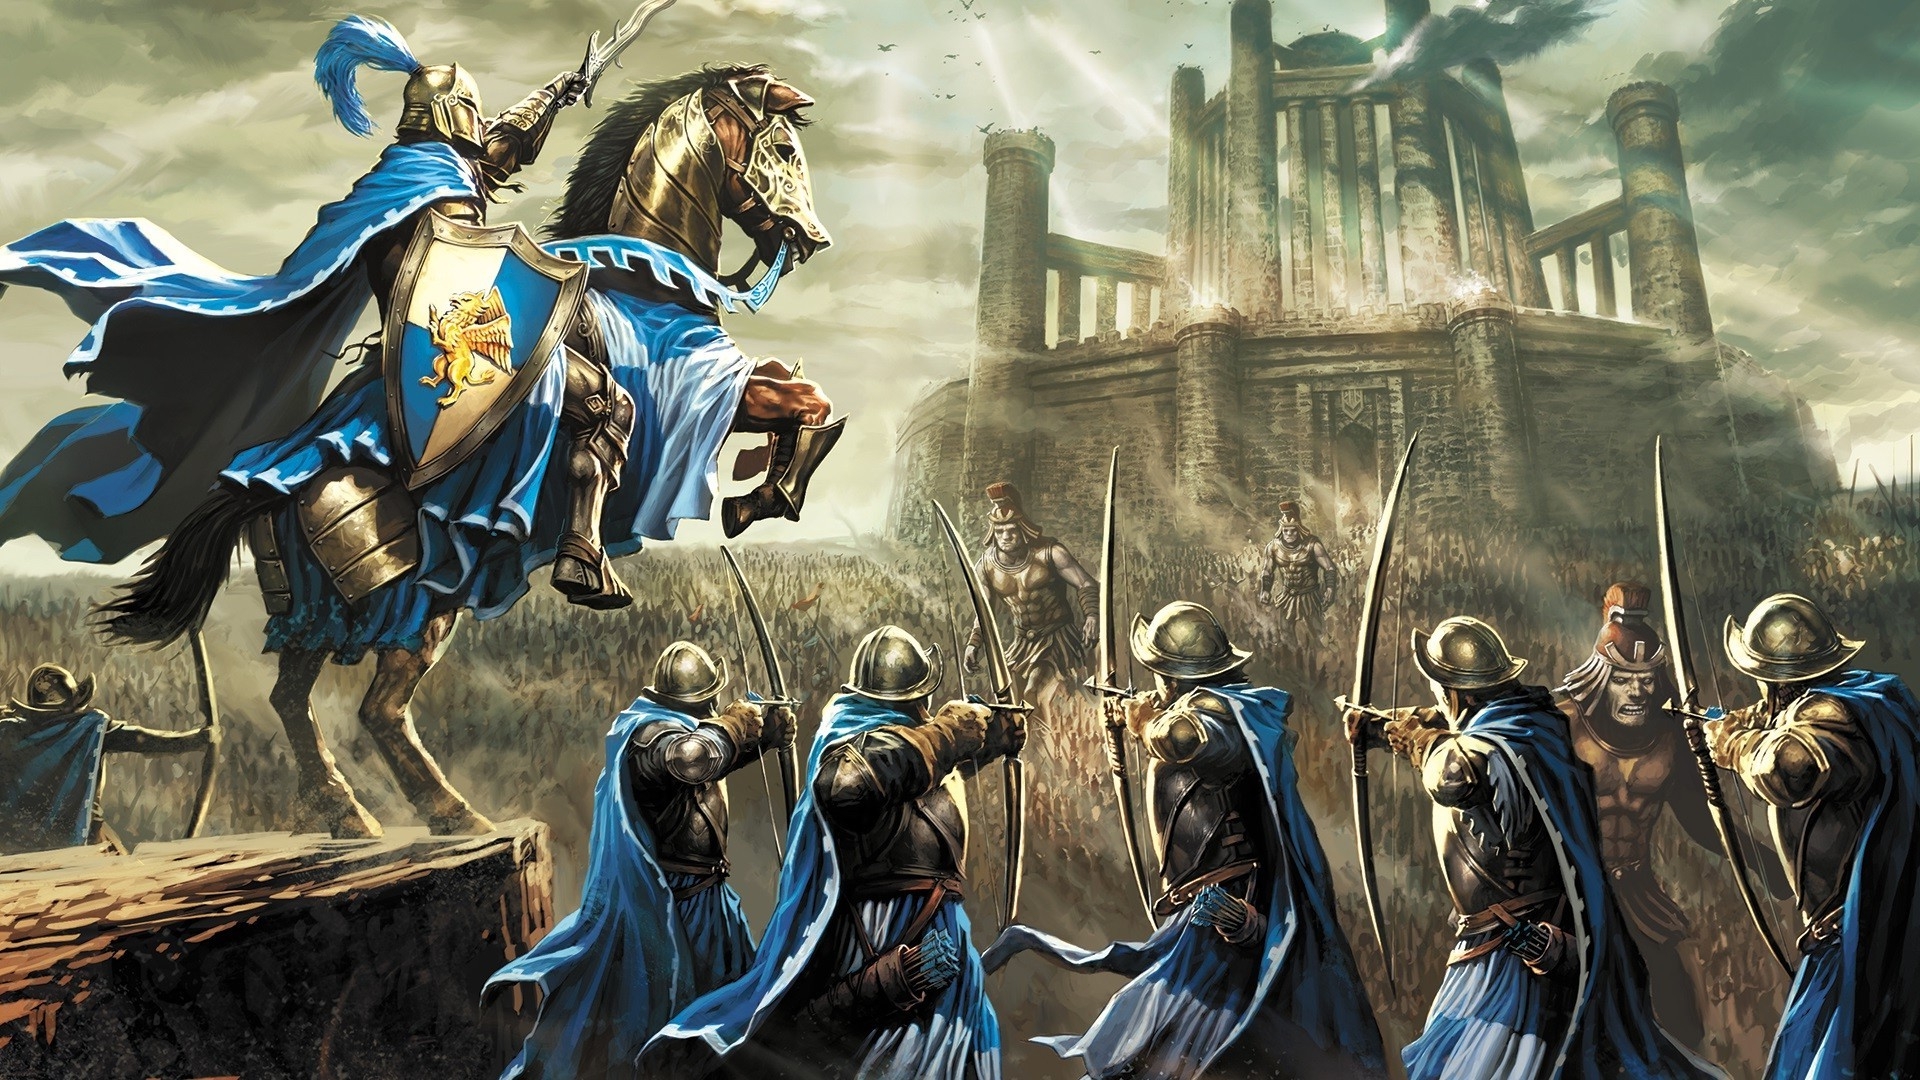 Video Game Heroes of Might and Magic III HD Wallpaper | Background Image